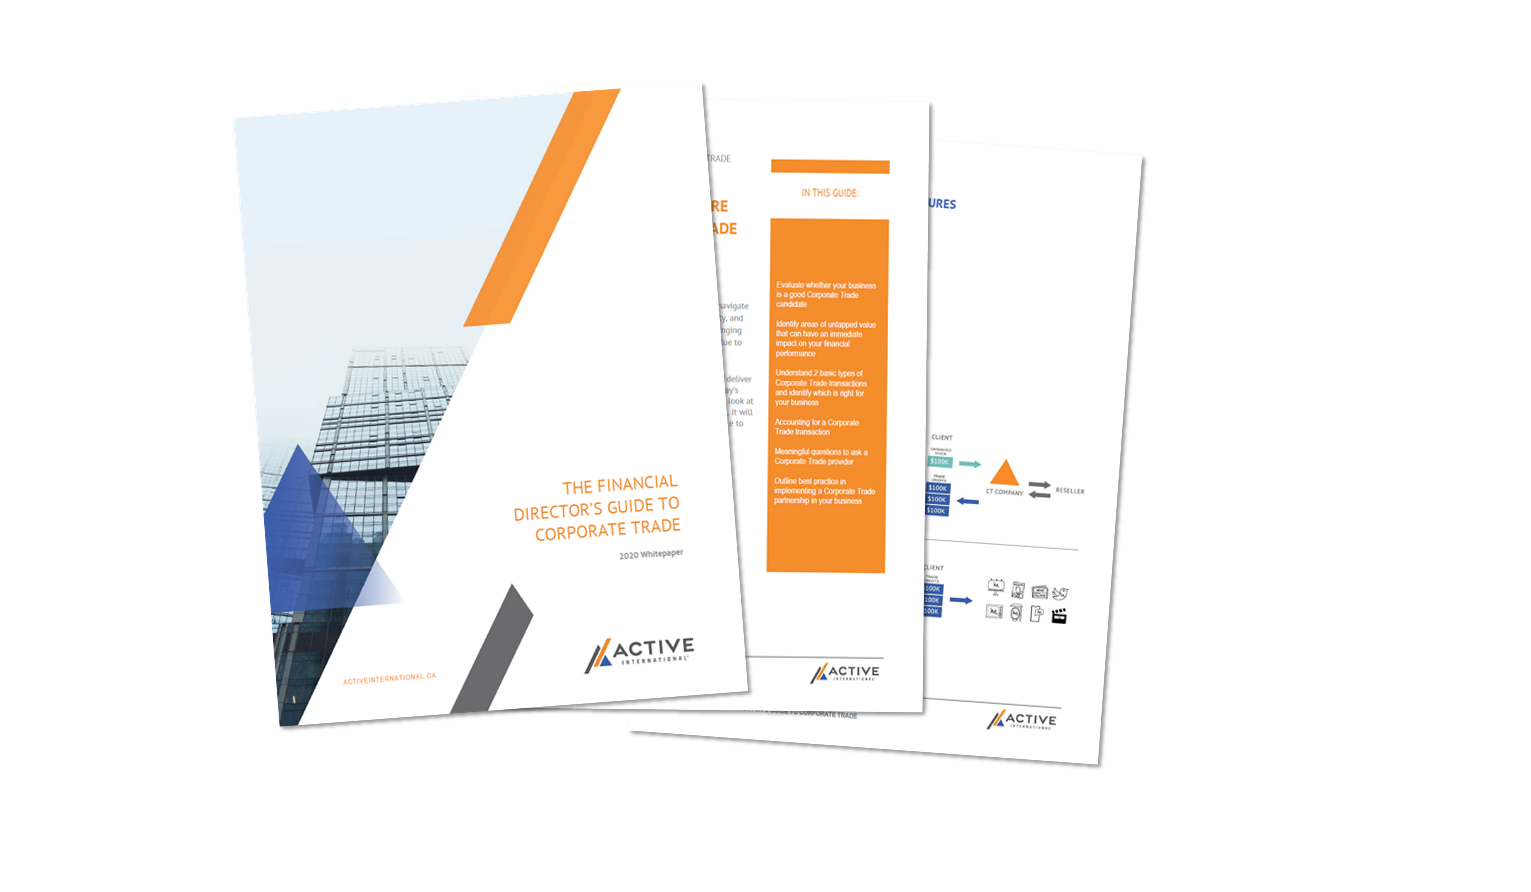 the financial director's guide to corporate trade whitepaper